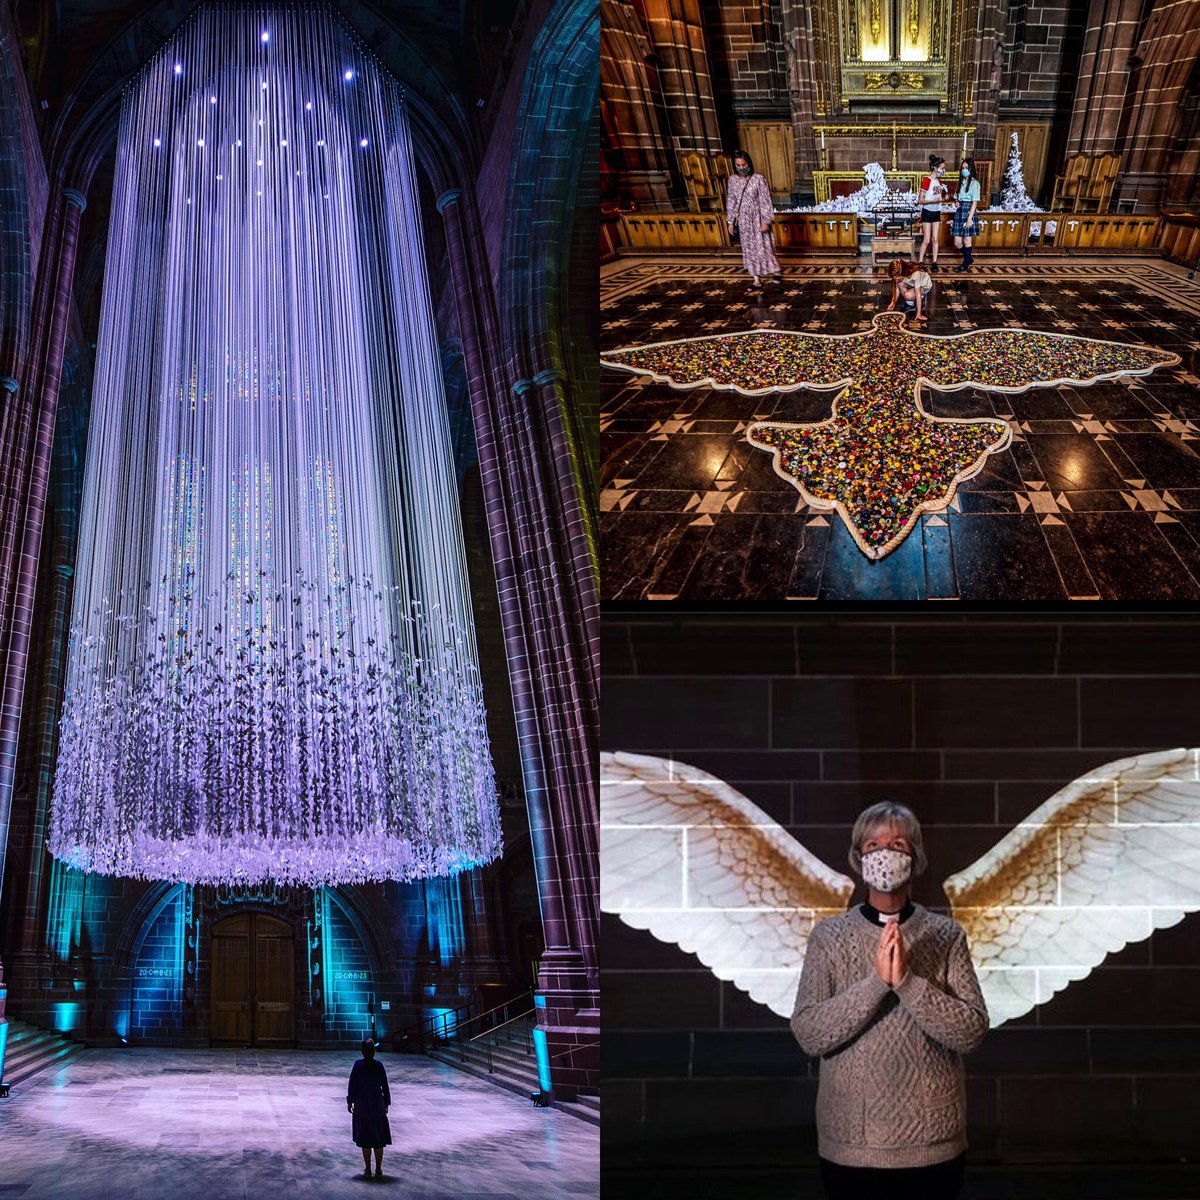 #peacedoves #angelwings and #peacetoourselves at @LivCathedral - exhibited throughout the #cathedral and receiving emotional and moving responses from the thousands who have experienced the #art #installation #liverpool #liverpolcathedral